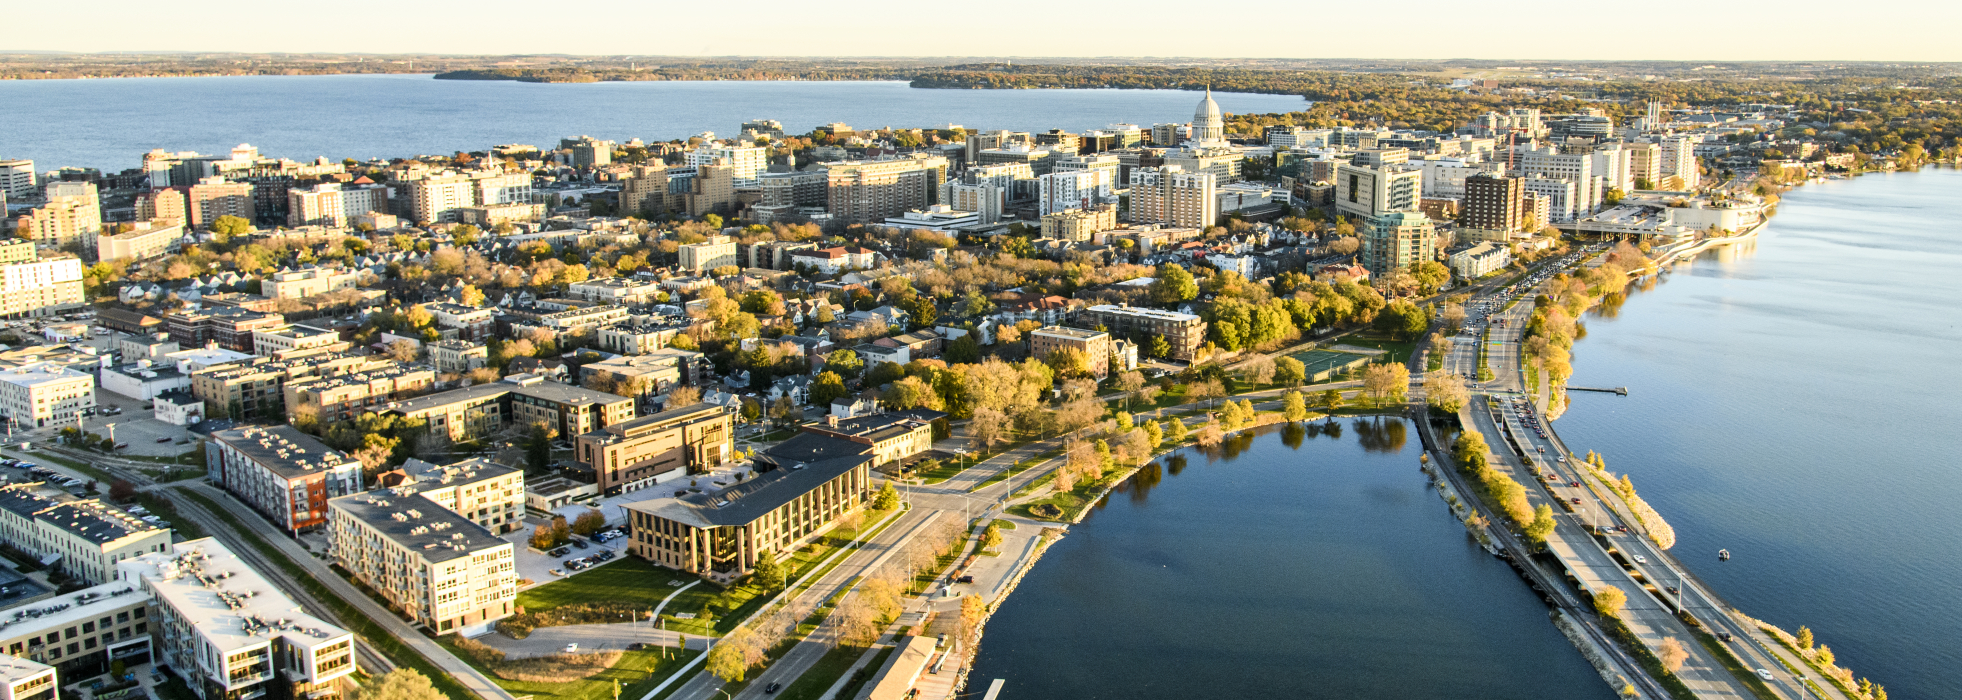 The downtown Madison Isthmus and the Wisconsin State Capitol, along with Monona Bay and John Nolen Drive, are pictured in an early morning aerial taken from a helicopter on Oct. 23, 2018. (Photo by Bryce Richter /UW-Madison)